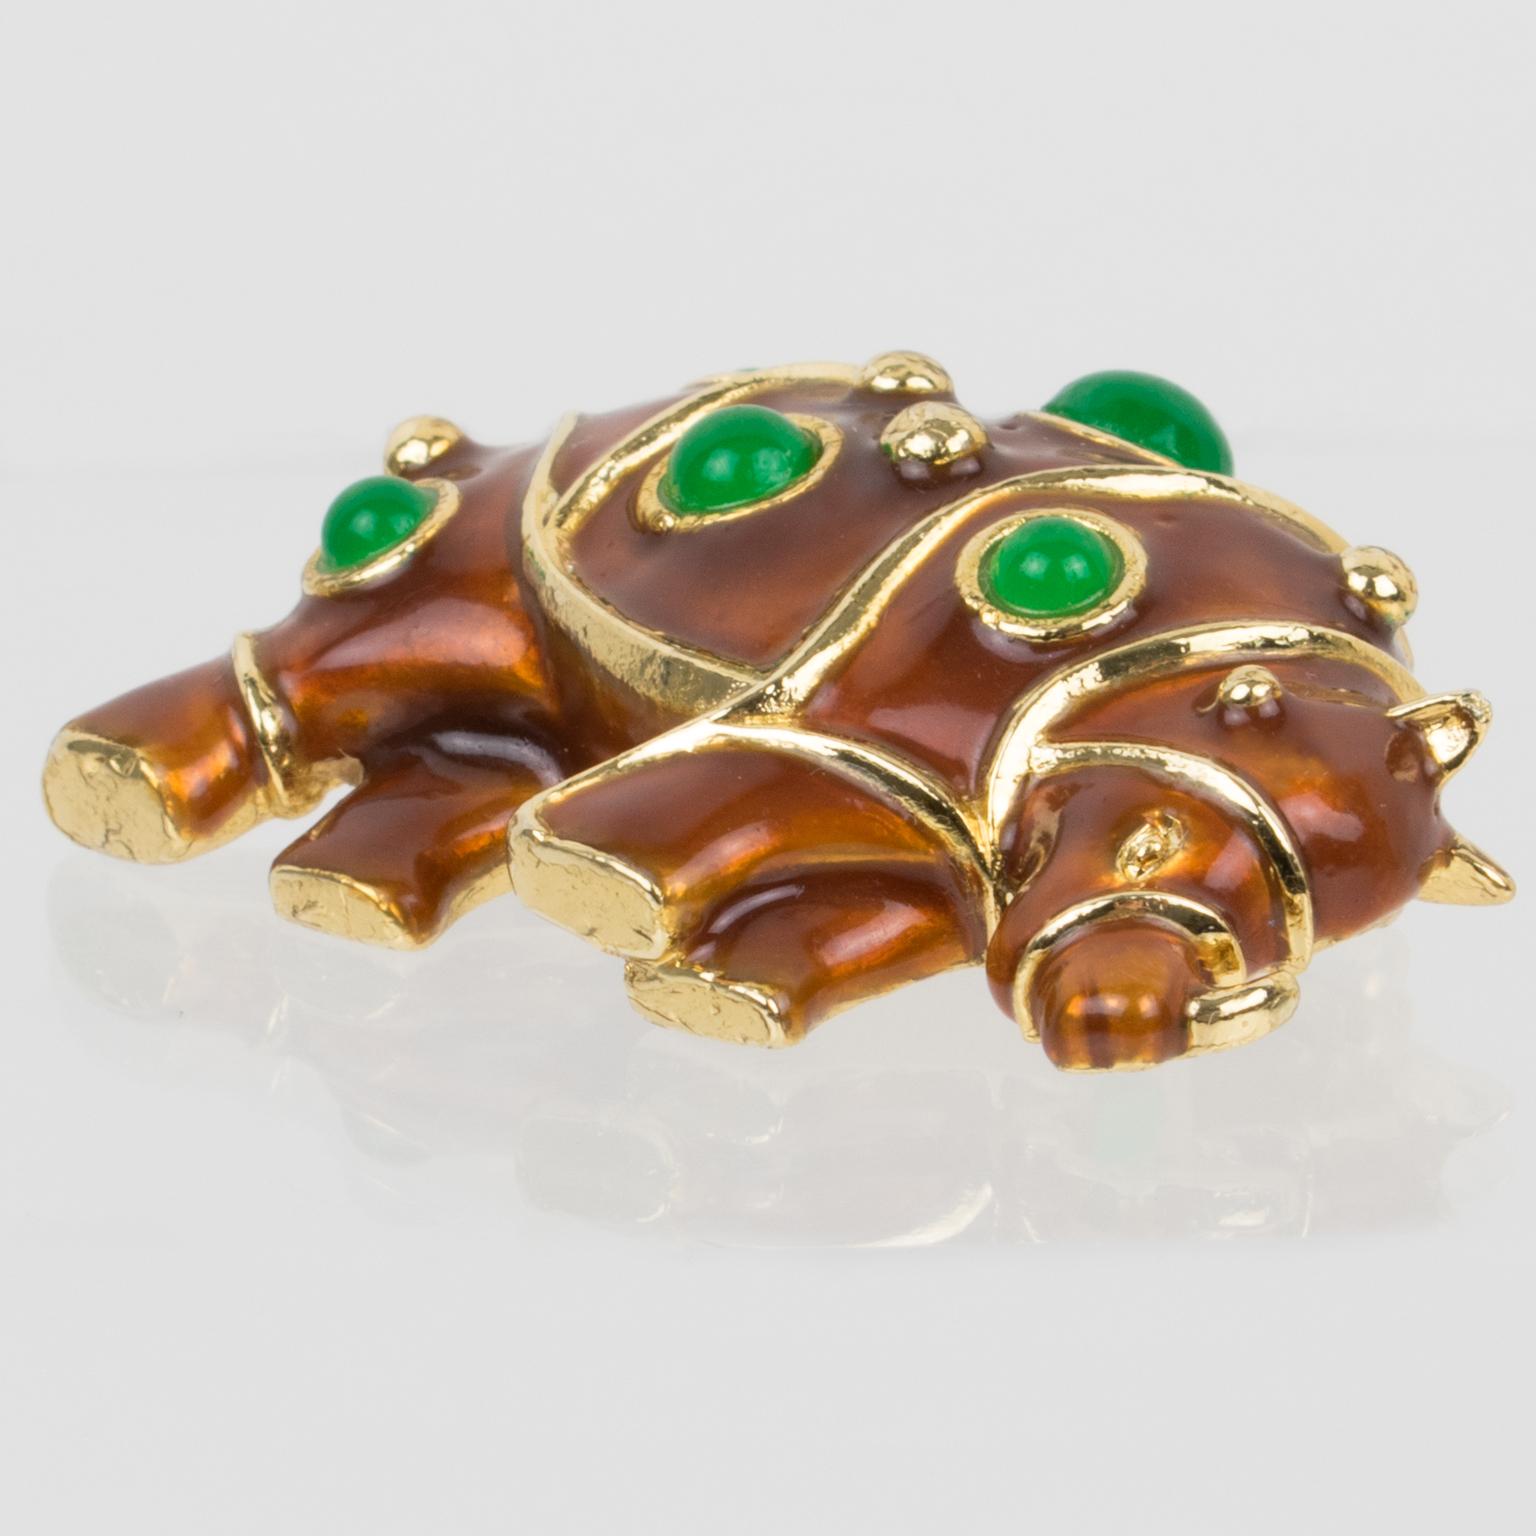 Lanvin Paris Gilt Metal and Enamel Jeweled Rhino Pin Brooch In Excellent Condition For Sale In Atlanta, GA